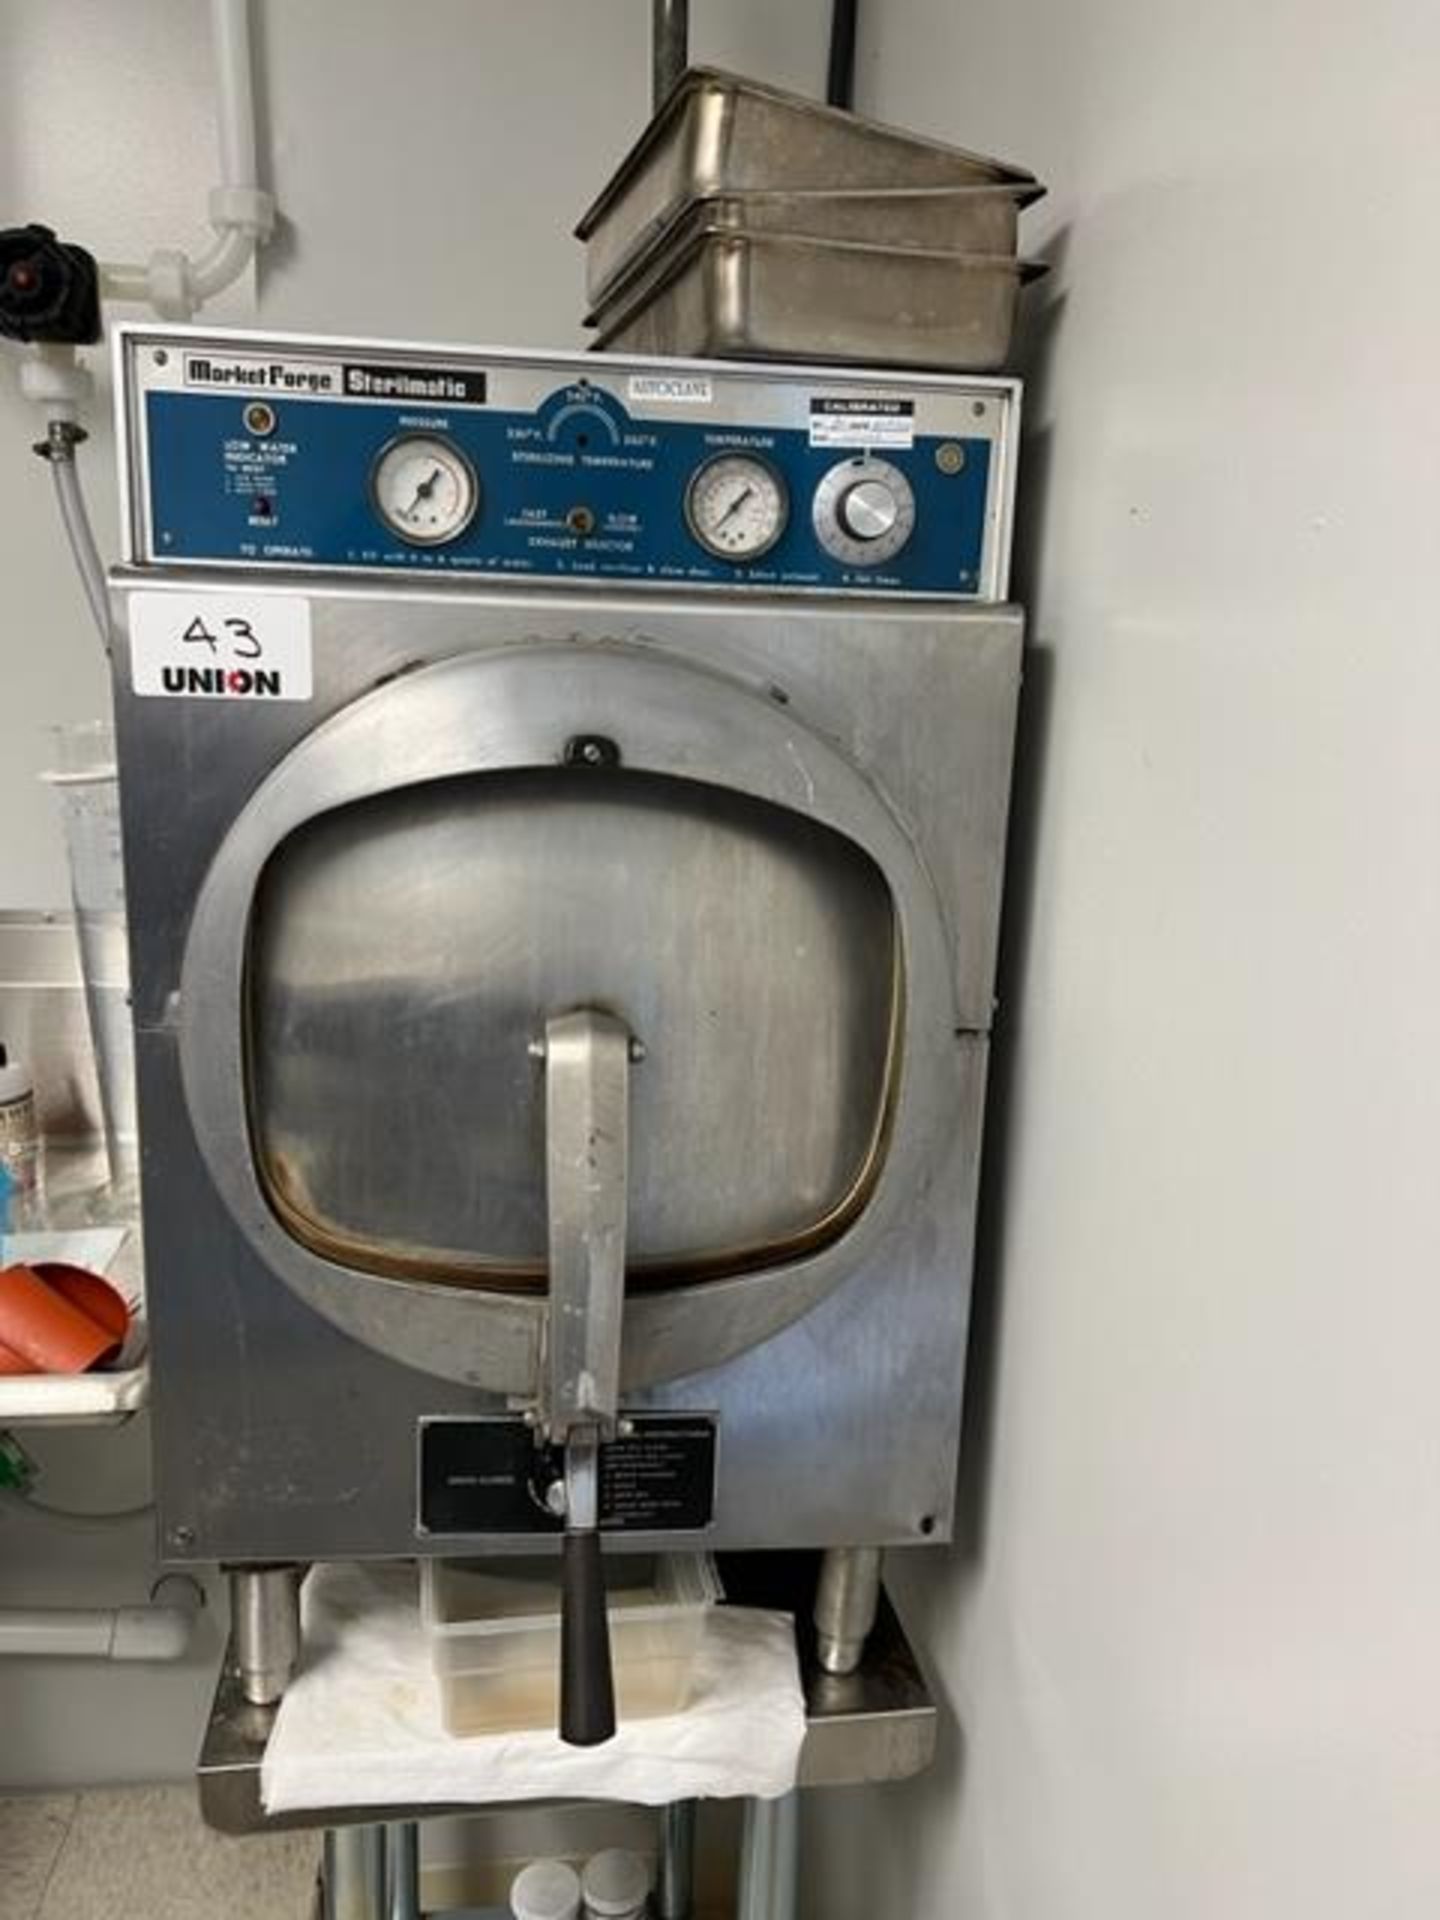 Asset 43 - Market Forge Sterilmatic Autoclave serial#2-88. $345.00 Rigged and packed on 48" x 40"